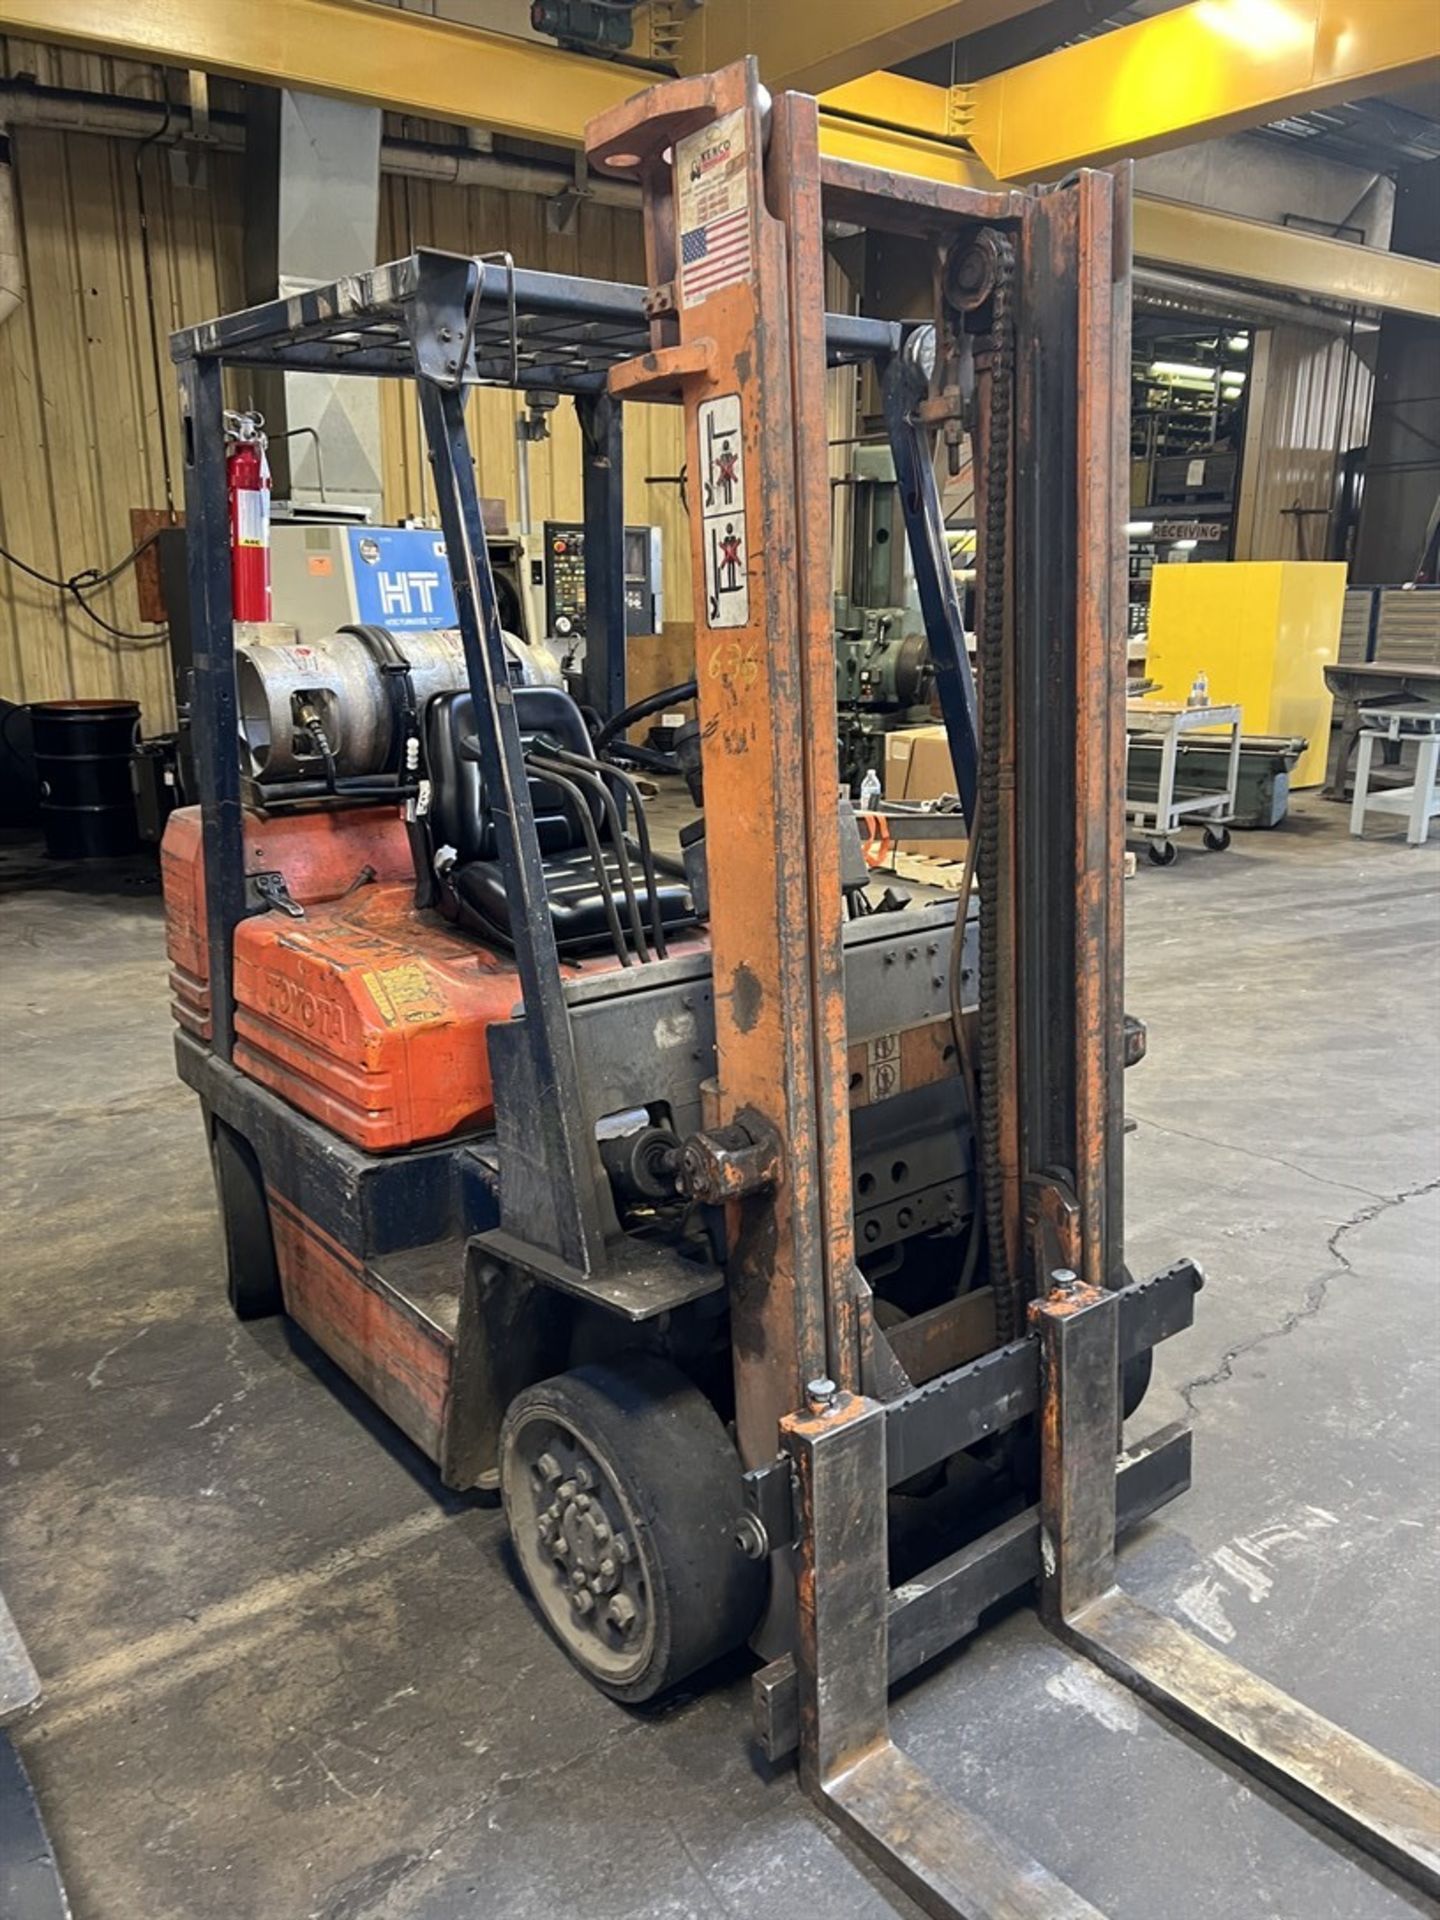 TOYOTA 5FHGC25 LP Forklift, s/n 5FGCU25-733, 5000 Lb Capacity, 2-Stage Mast, OH Protection ( - Image 3 of 10